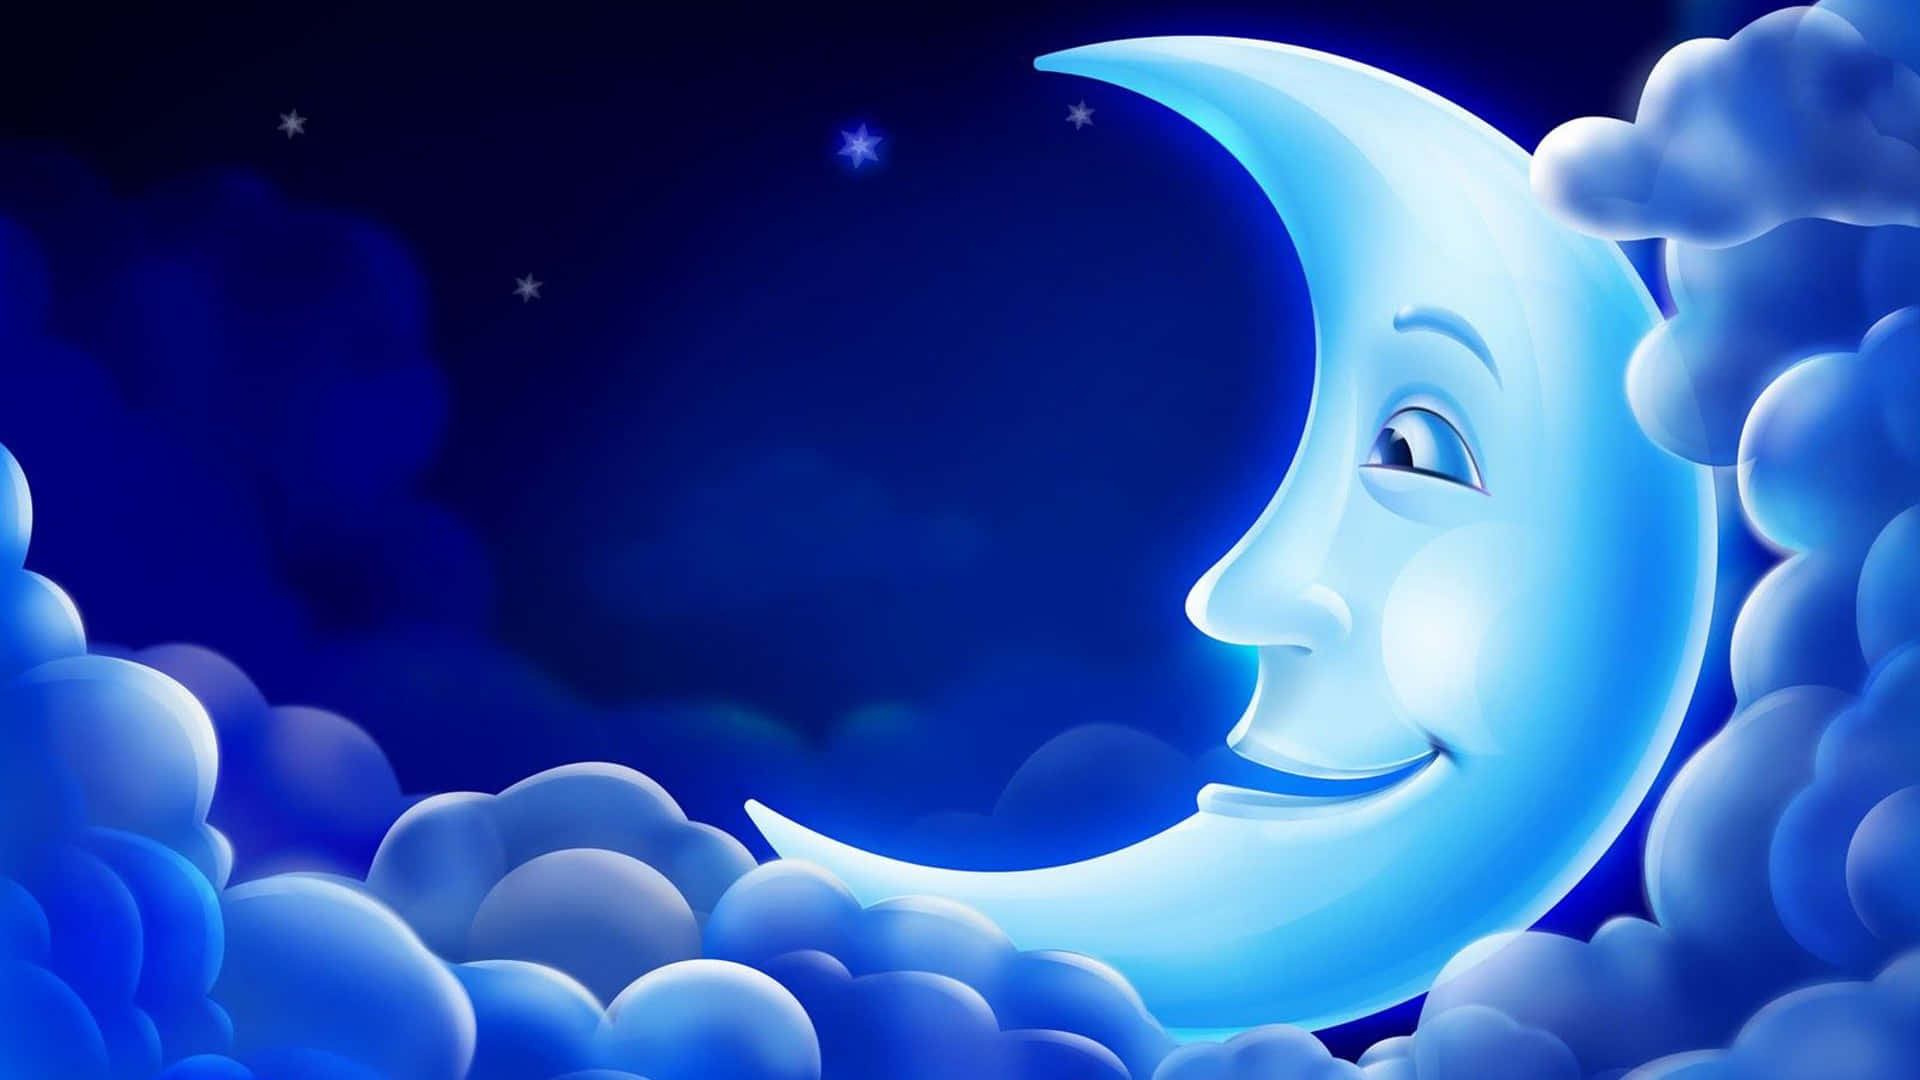 Smiling Crescent Moon Among Clouds Wallpaper